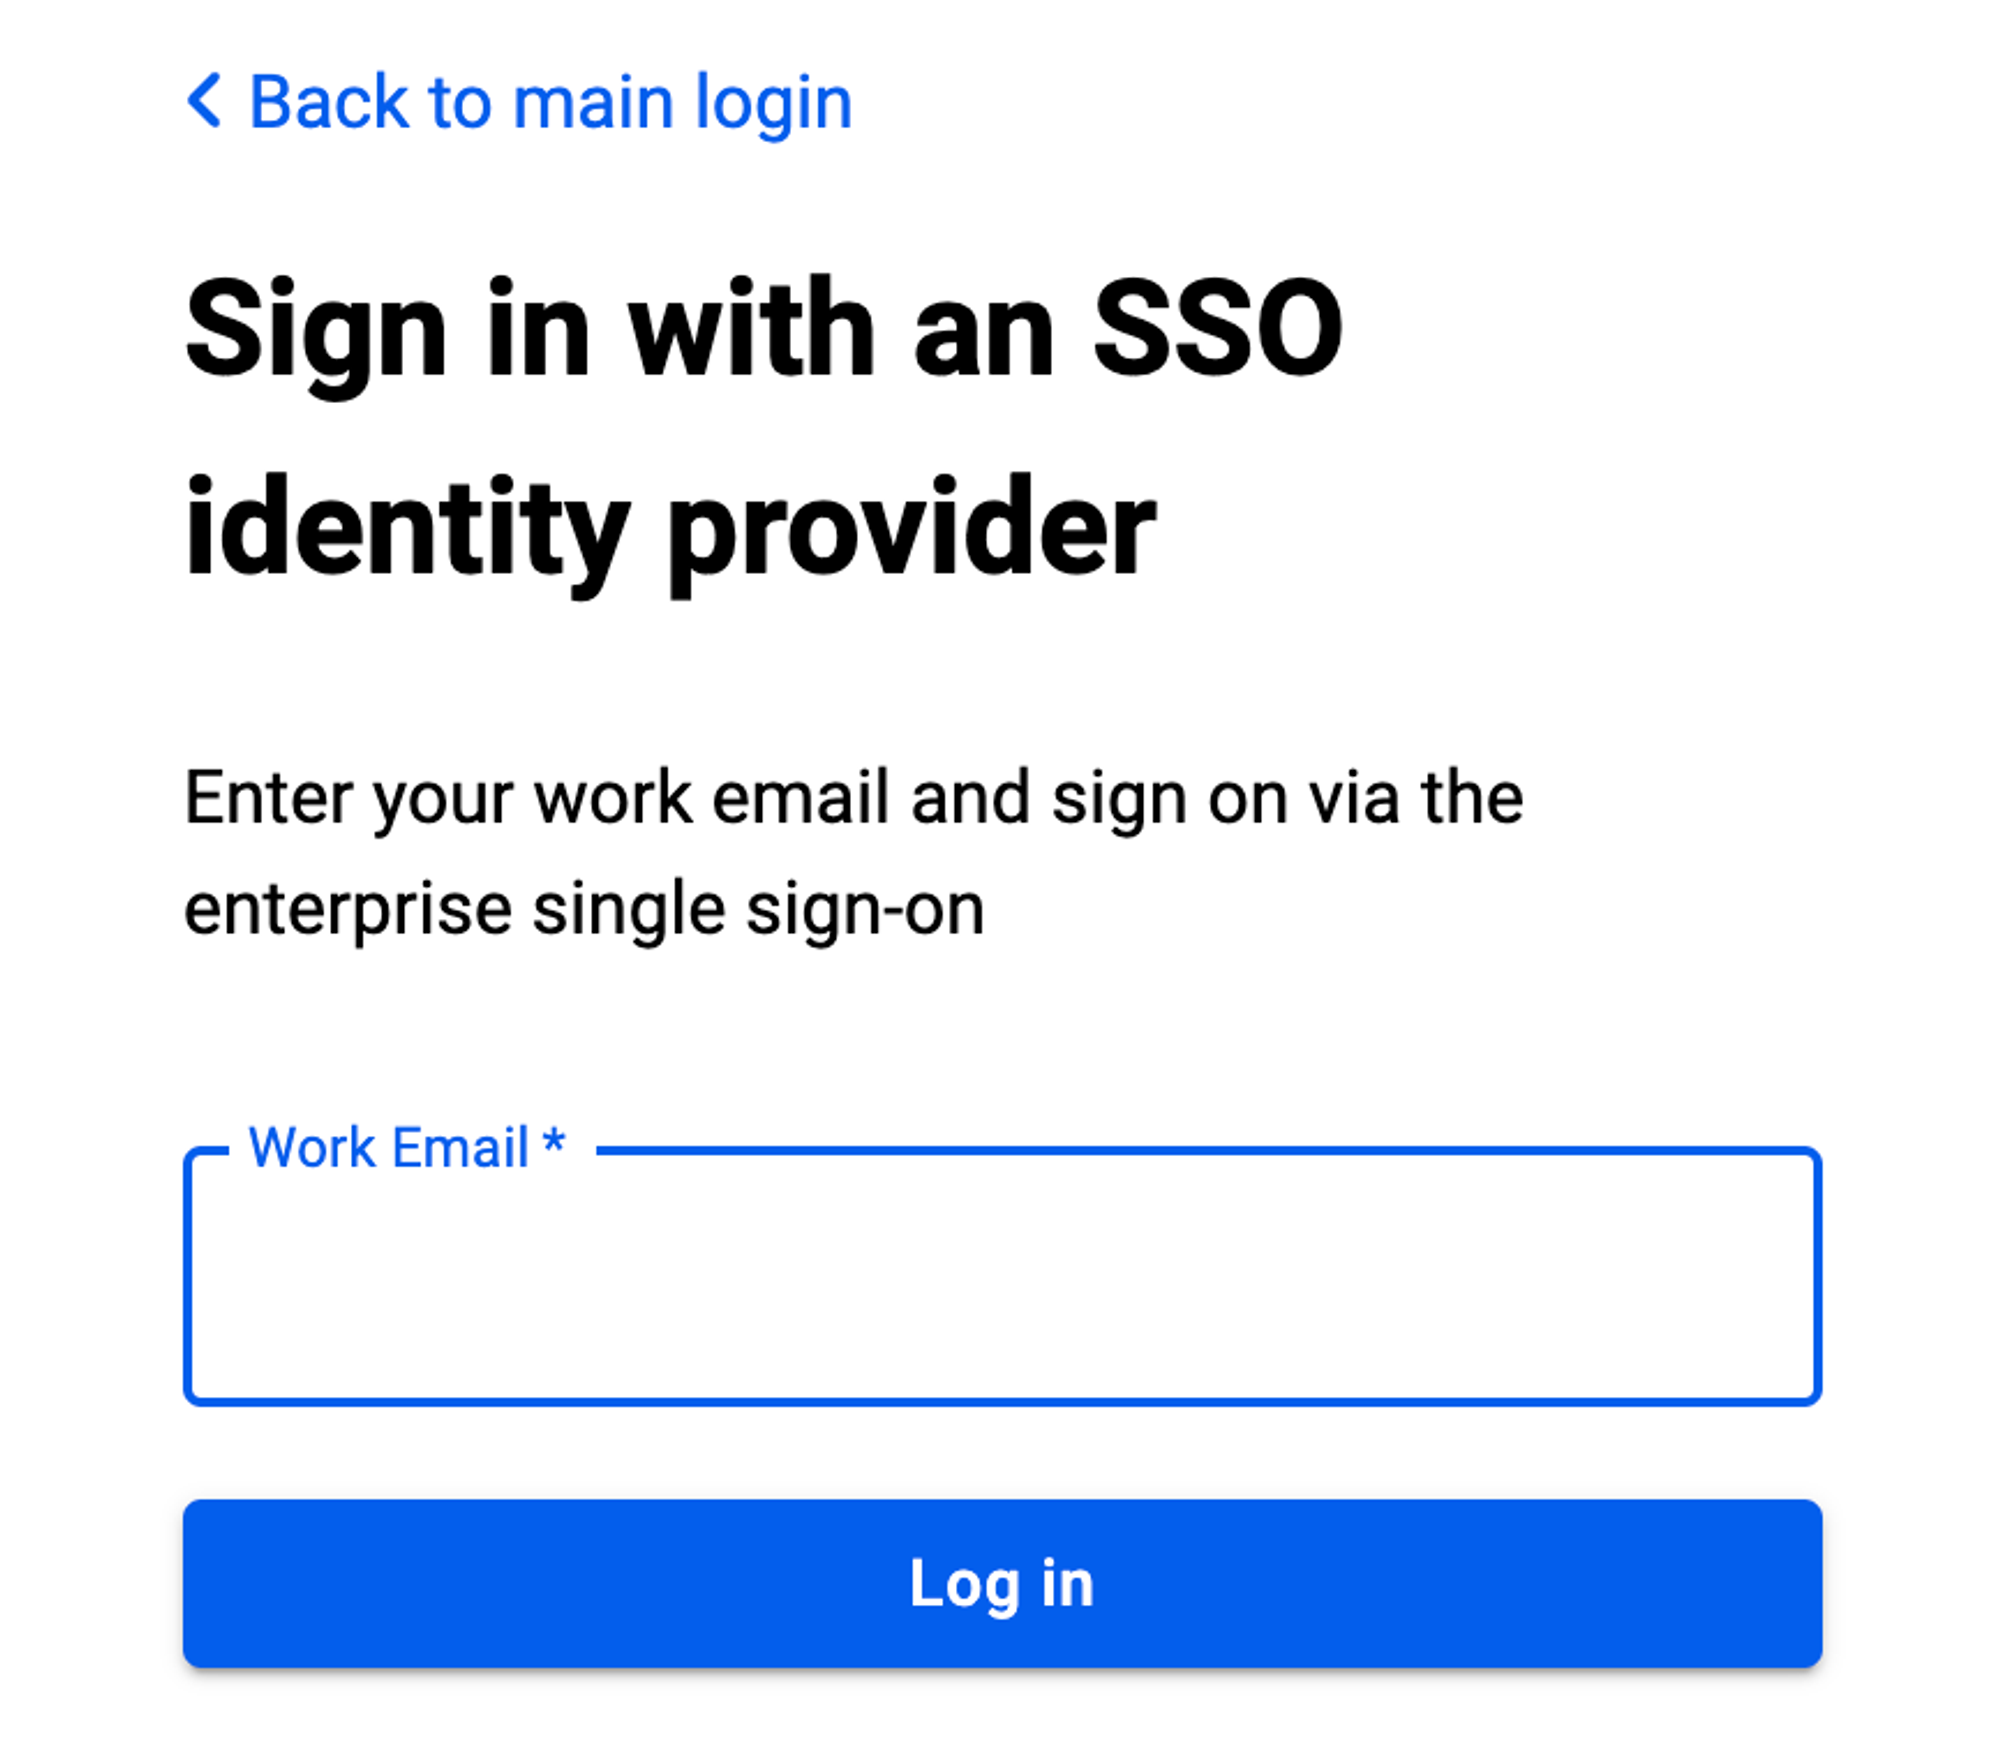 Sign in with an SSO identity provider